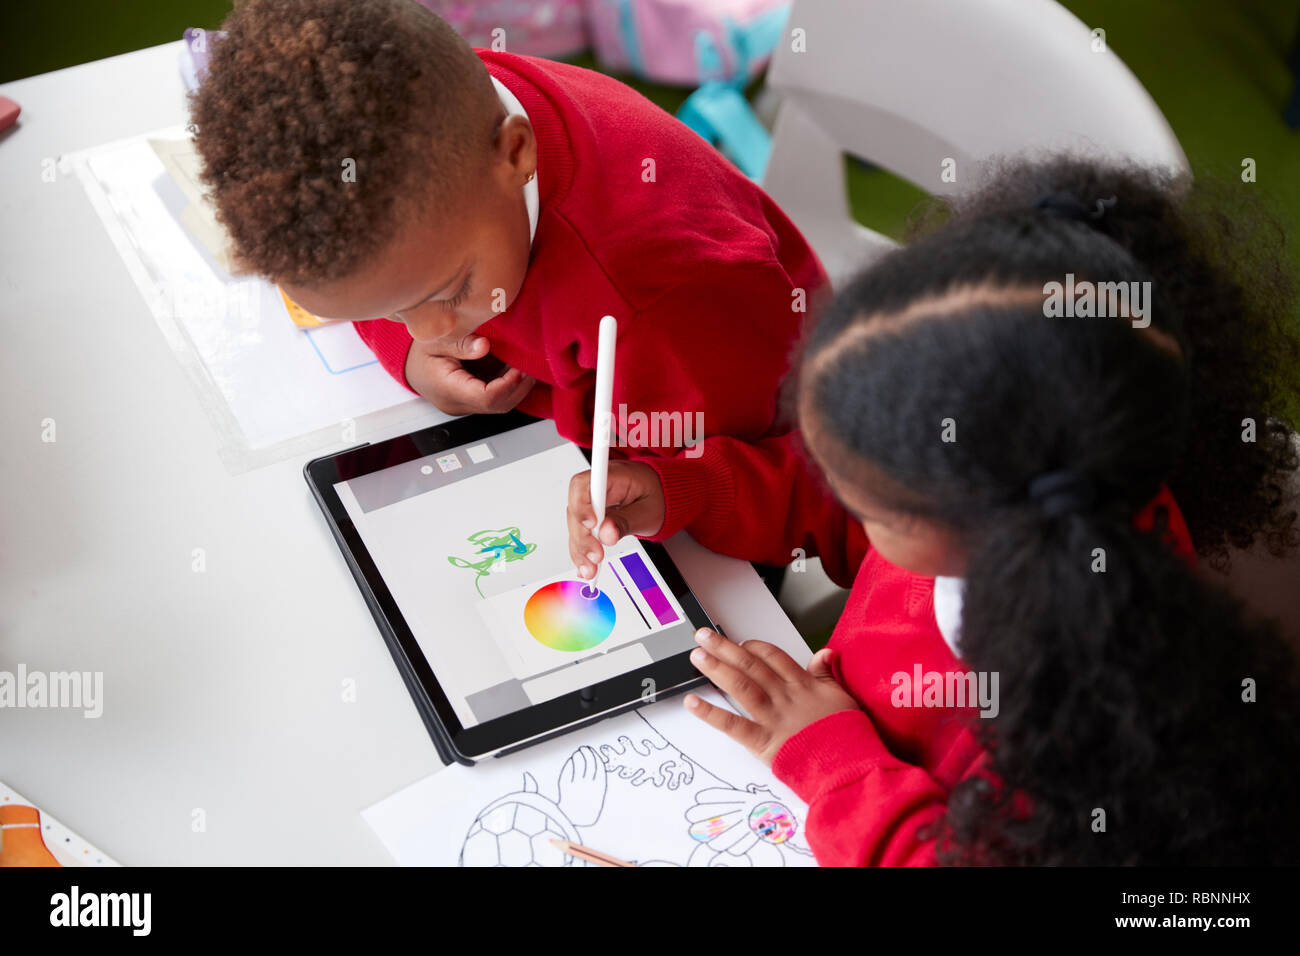 Elevated view of two kindergarten school kids sitting at a desk in a classroom drawing with a tablet computer and stylus, close up Stock Photo